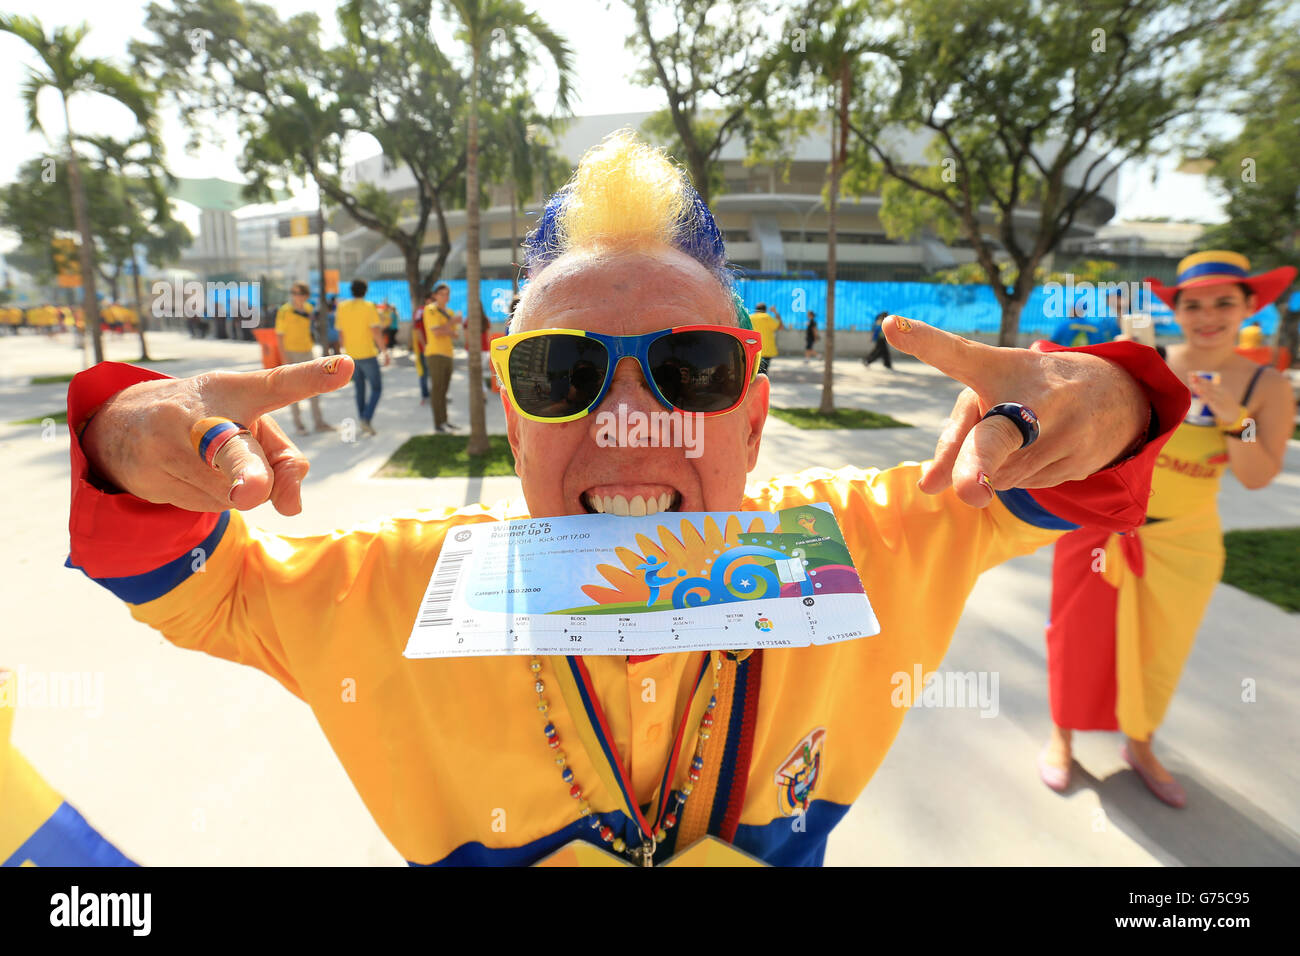 A Colombia fan shows his support outside the ground before the FIFA World Cup, Round of 16 match at the Estadio do Maracana, Rio de Janeiro, Brazil. PRESS ASSOCIATION Photo. Picture date: Saturday June 28, 2014. Photo credit should read: Mike Egerton/PA Wire. RESTRICTIONS: No commercial use. No use with any unofficial 3rd party logos. No manipulation of images. No video emulation Stock Photo